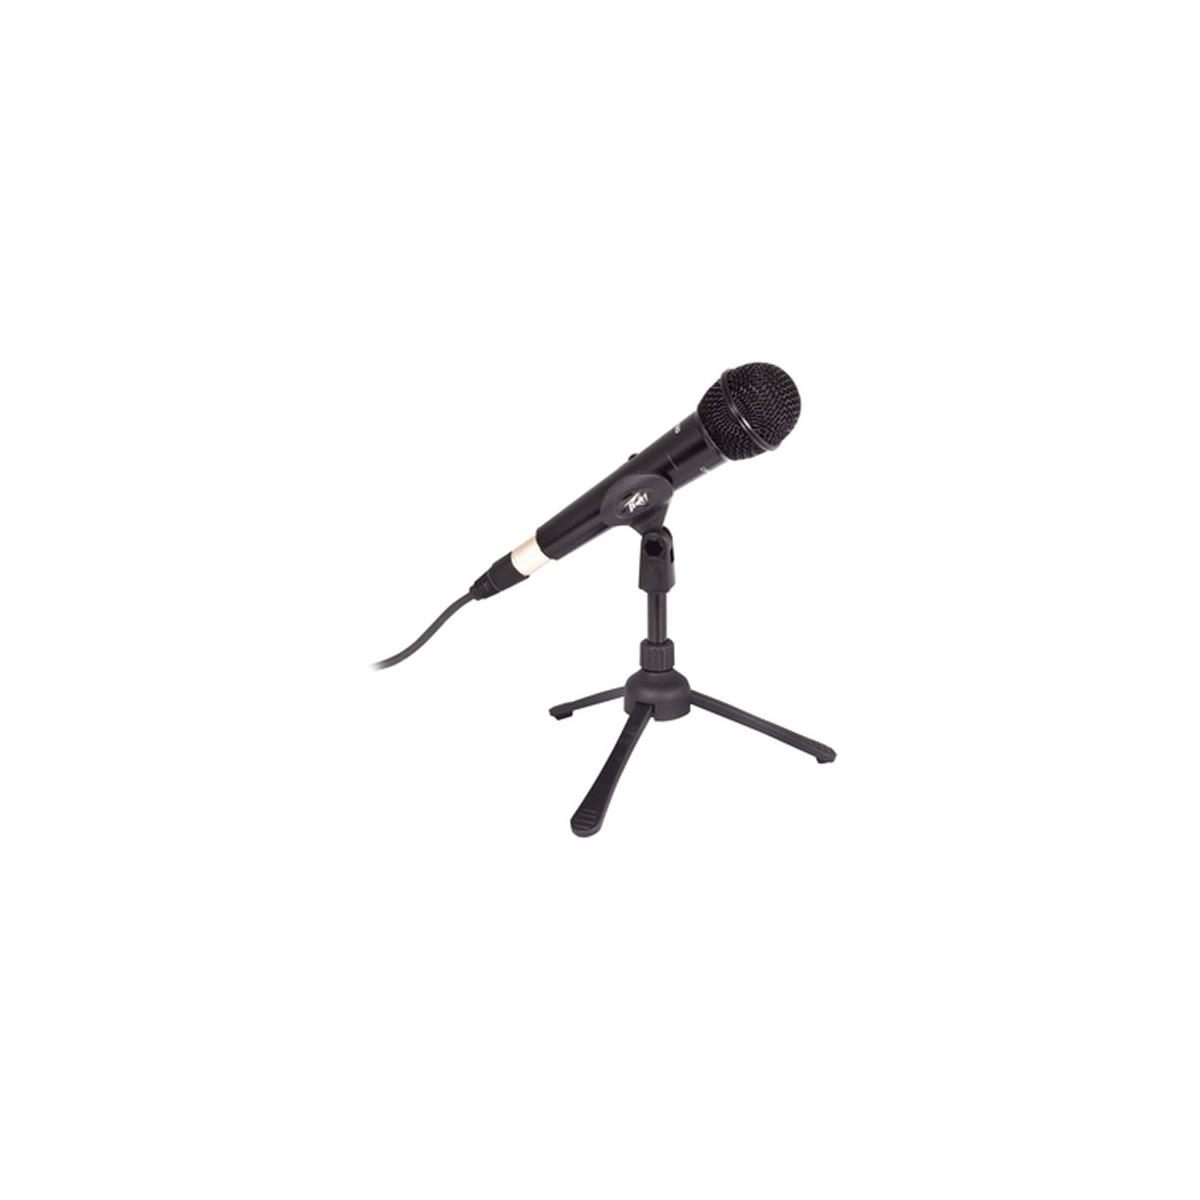 Photos - Microphone Stand Peavey Microphone Desktop Tripod Stand 03028280 